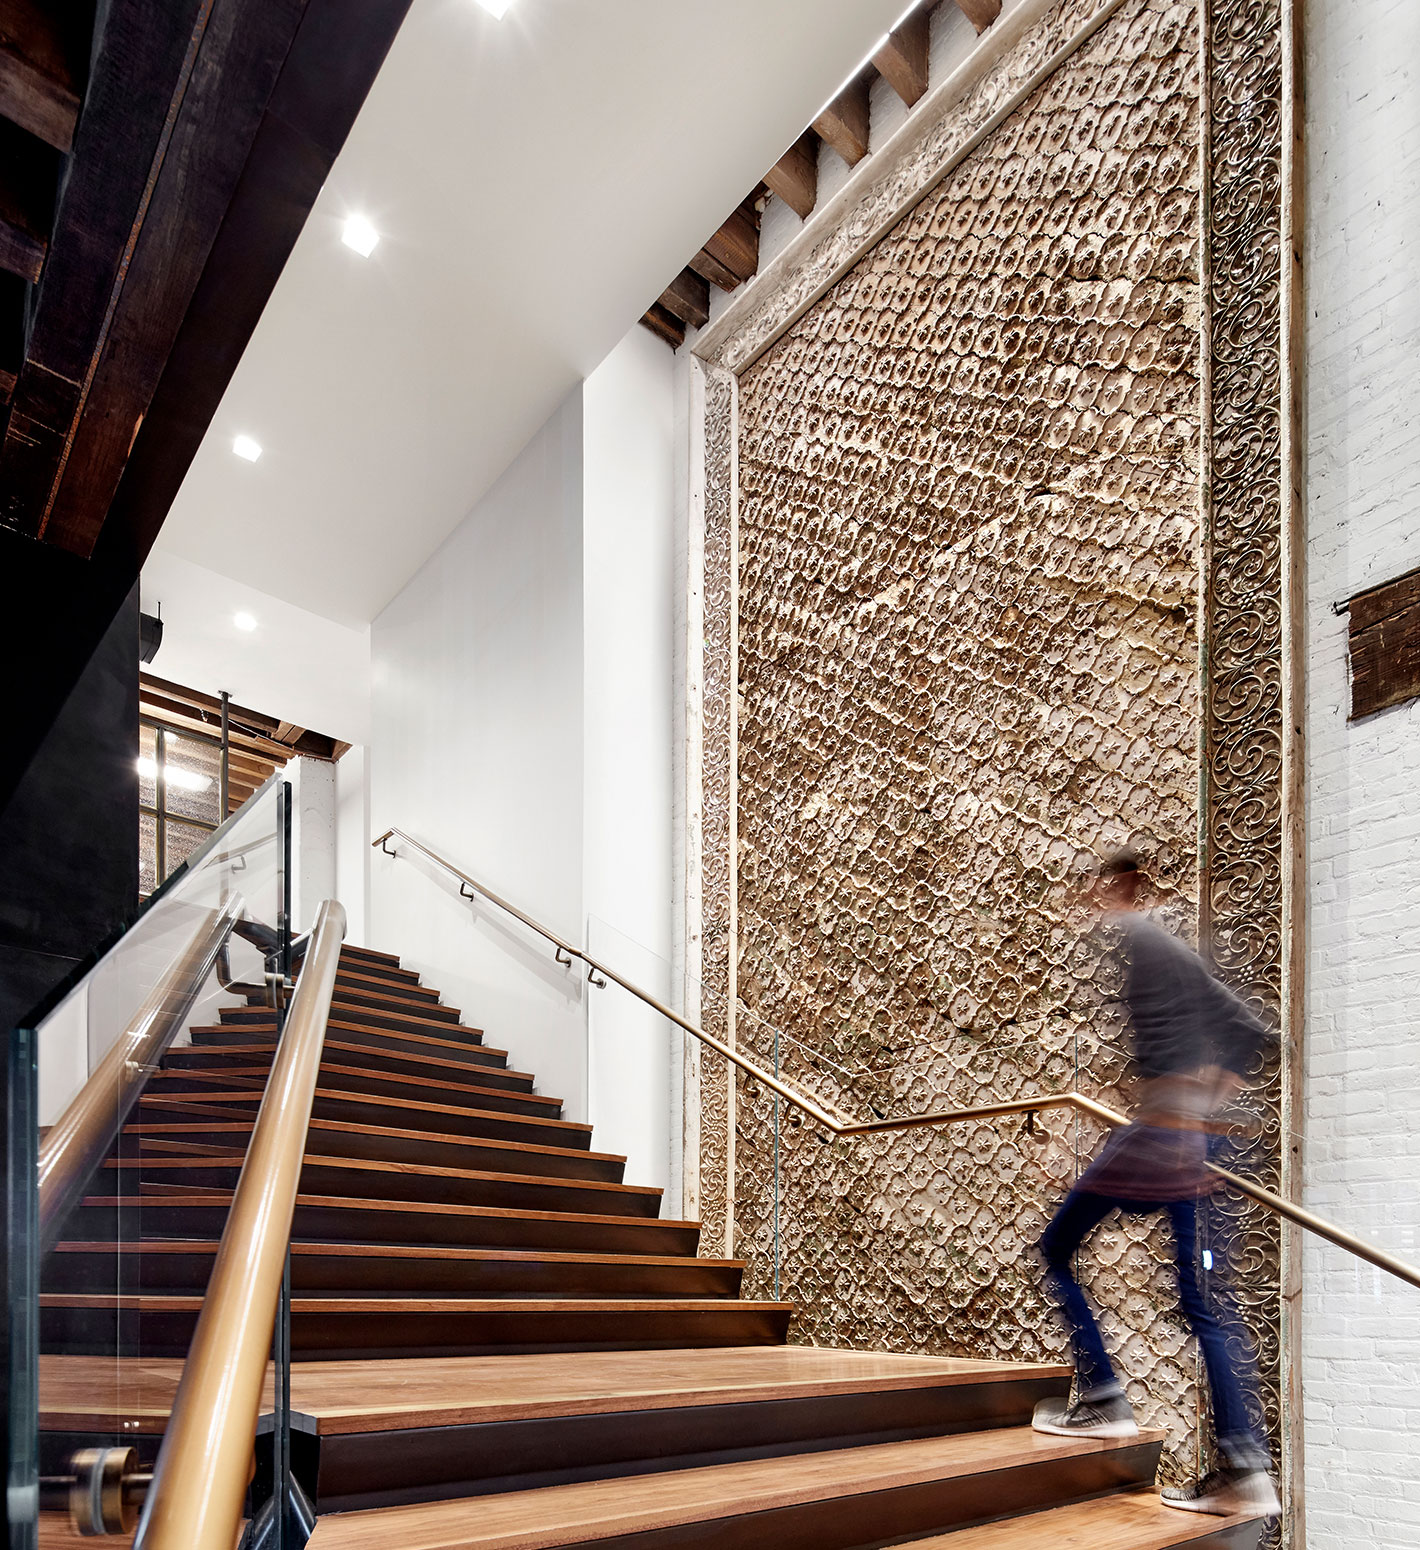 The grand central staircase at West Elm's Headquarters in DUMBO Brooklyn.